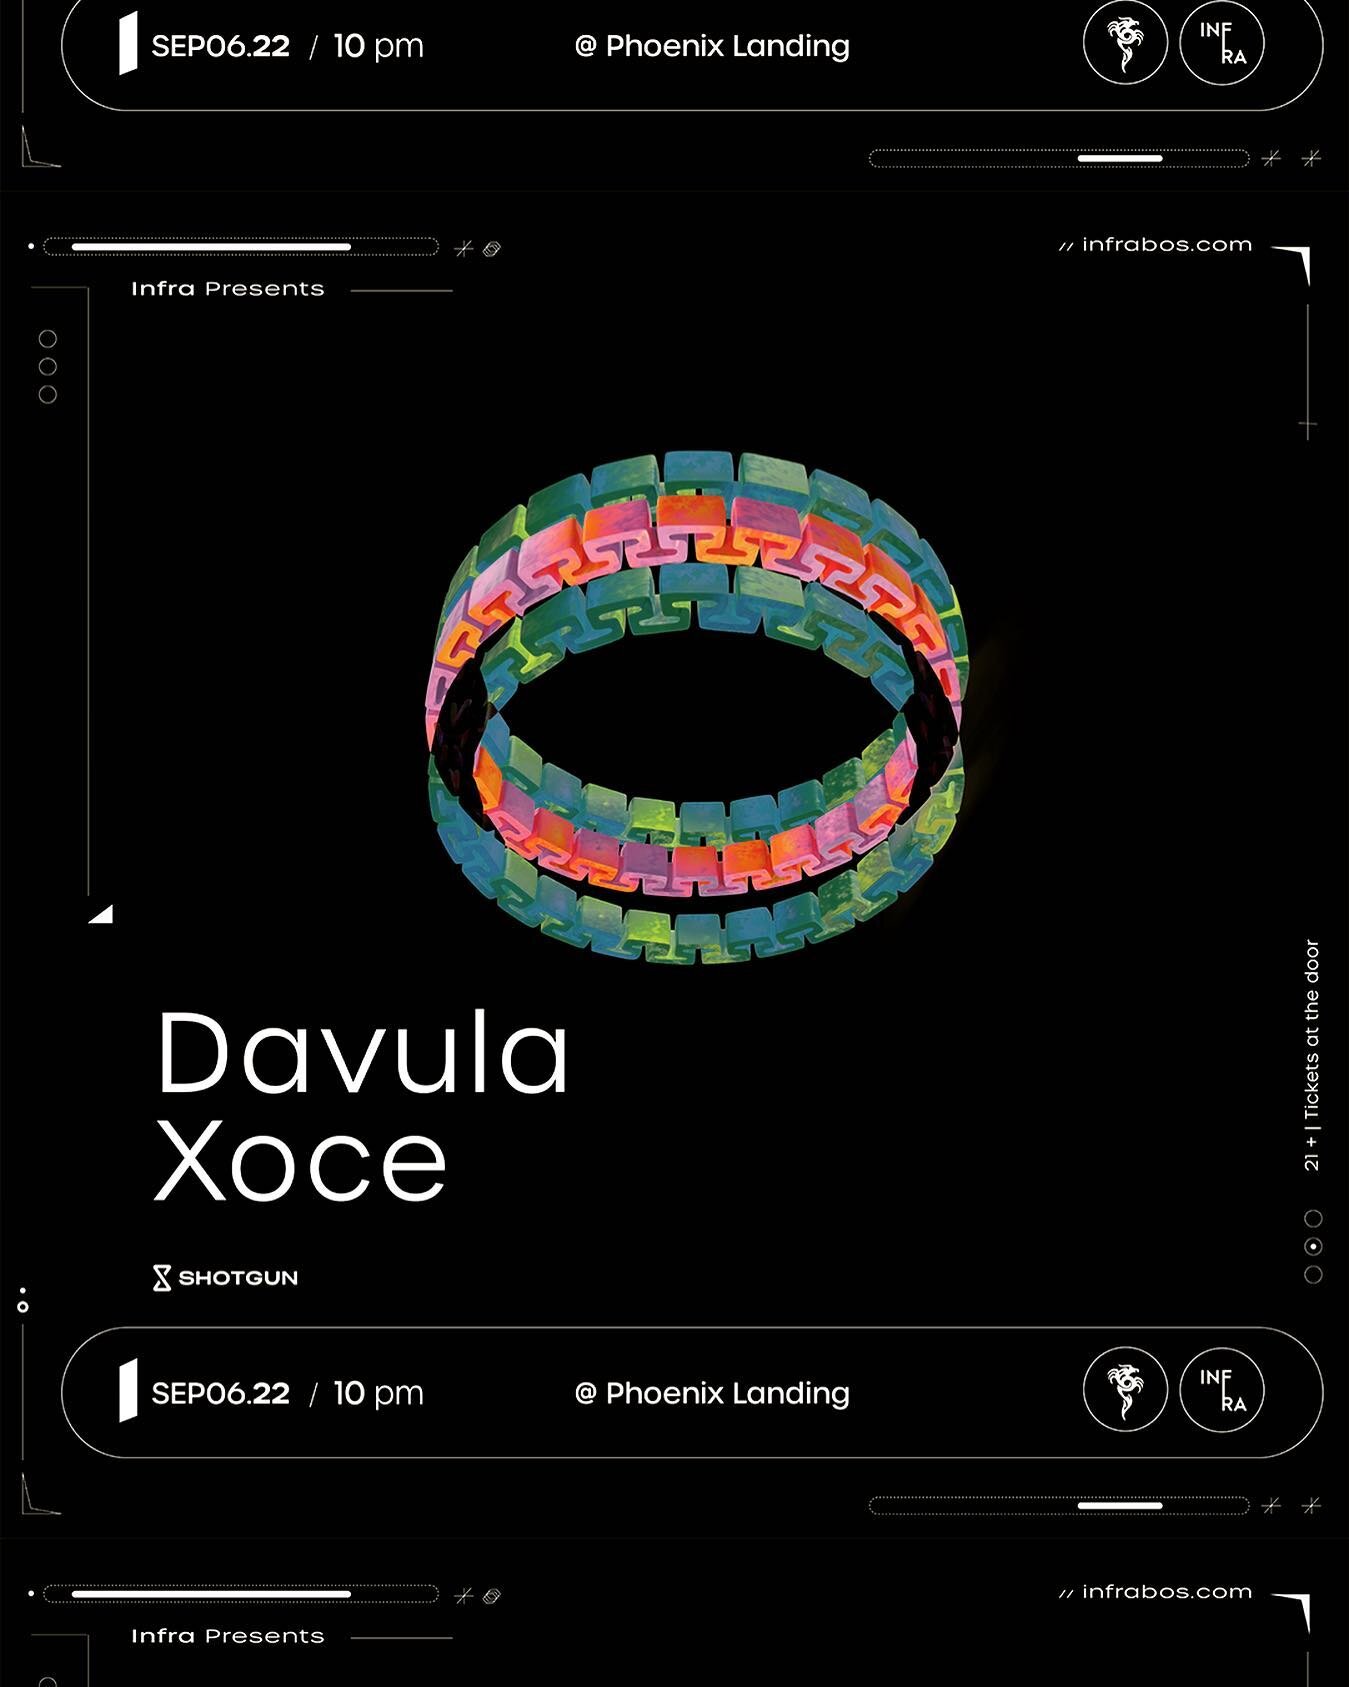 TONIGHT -&gt; Infra Presents:

// DAVULA
// XOCE

======================================

The Phoenix Landing
512 Massachusetts Ave
Cambridge, MA 02139
21+

Doors 10pm
$5 all night long

----

&quot;Perpetually and unconditionally cultivating the und